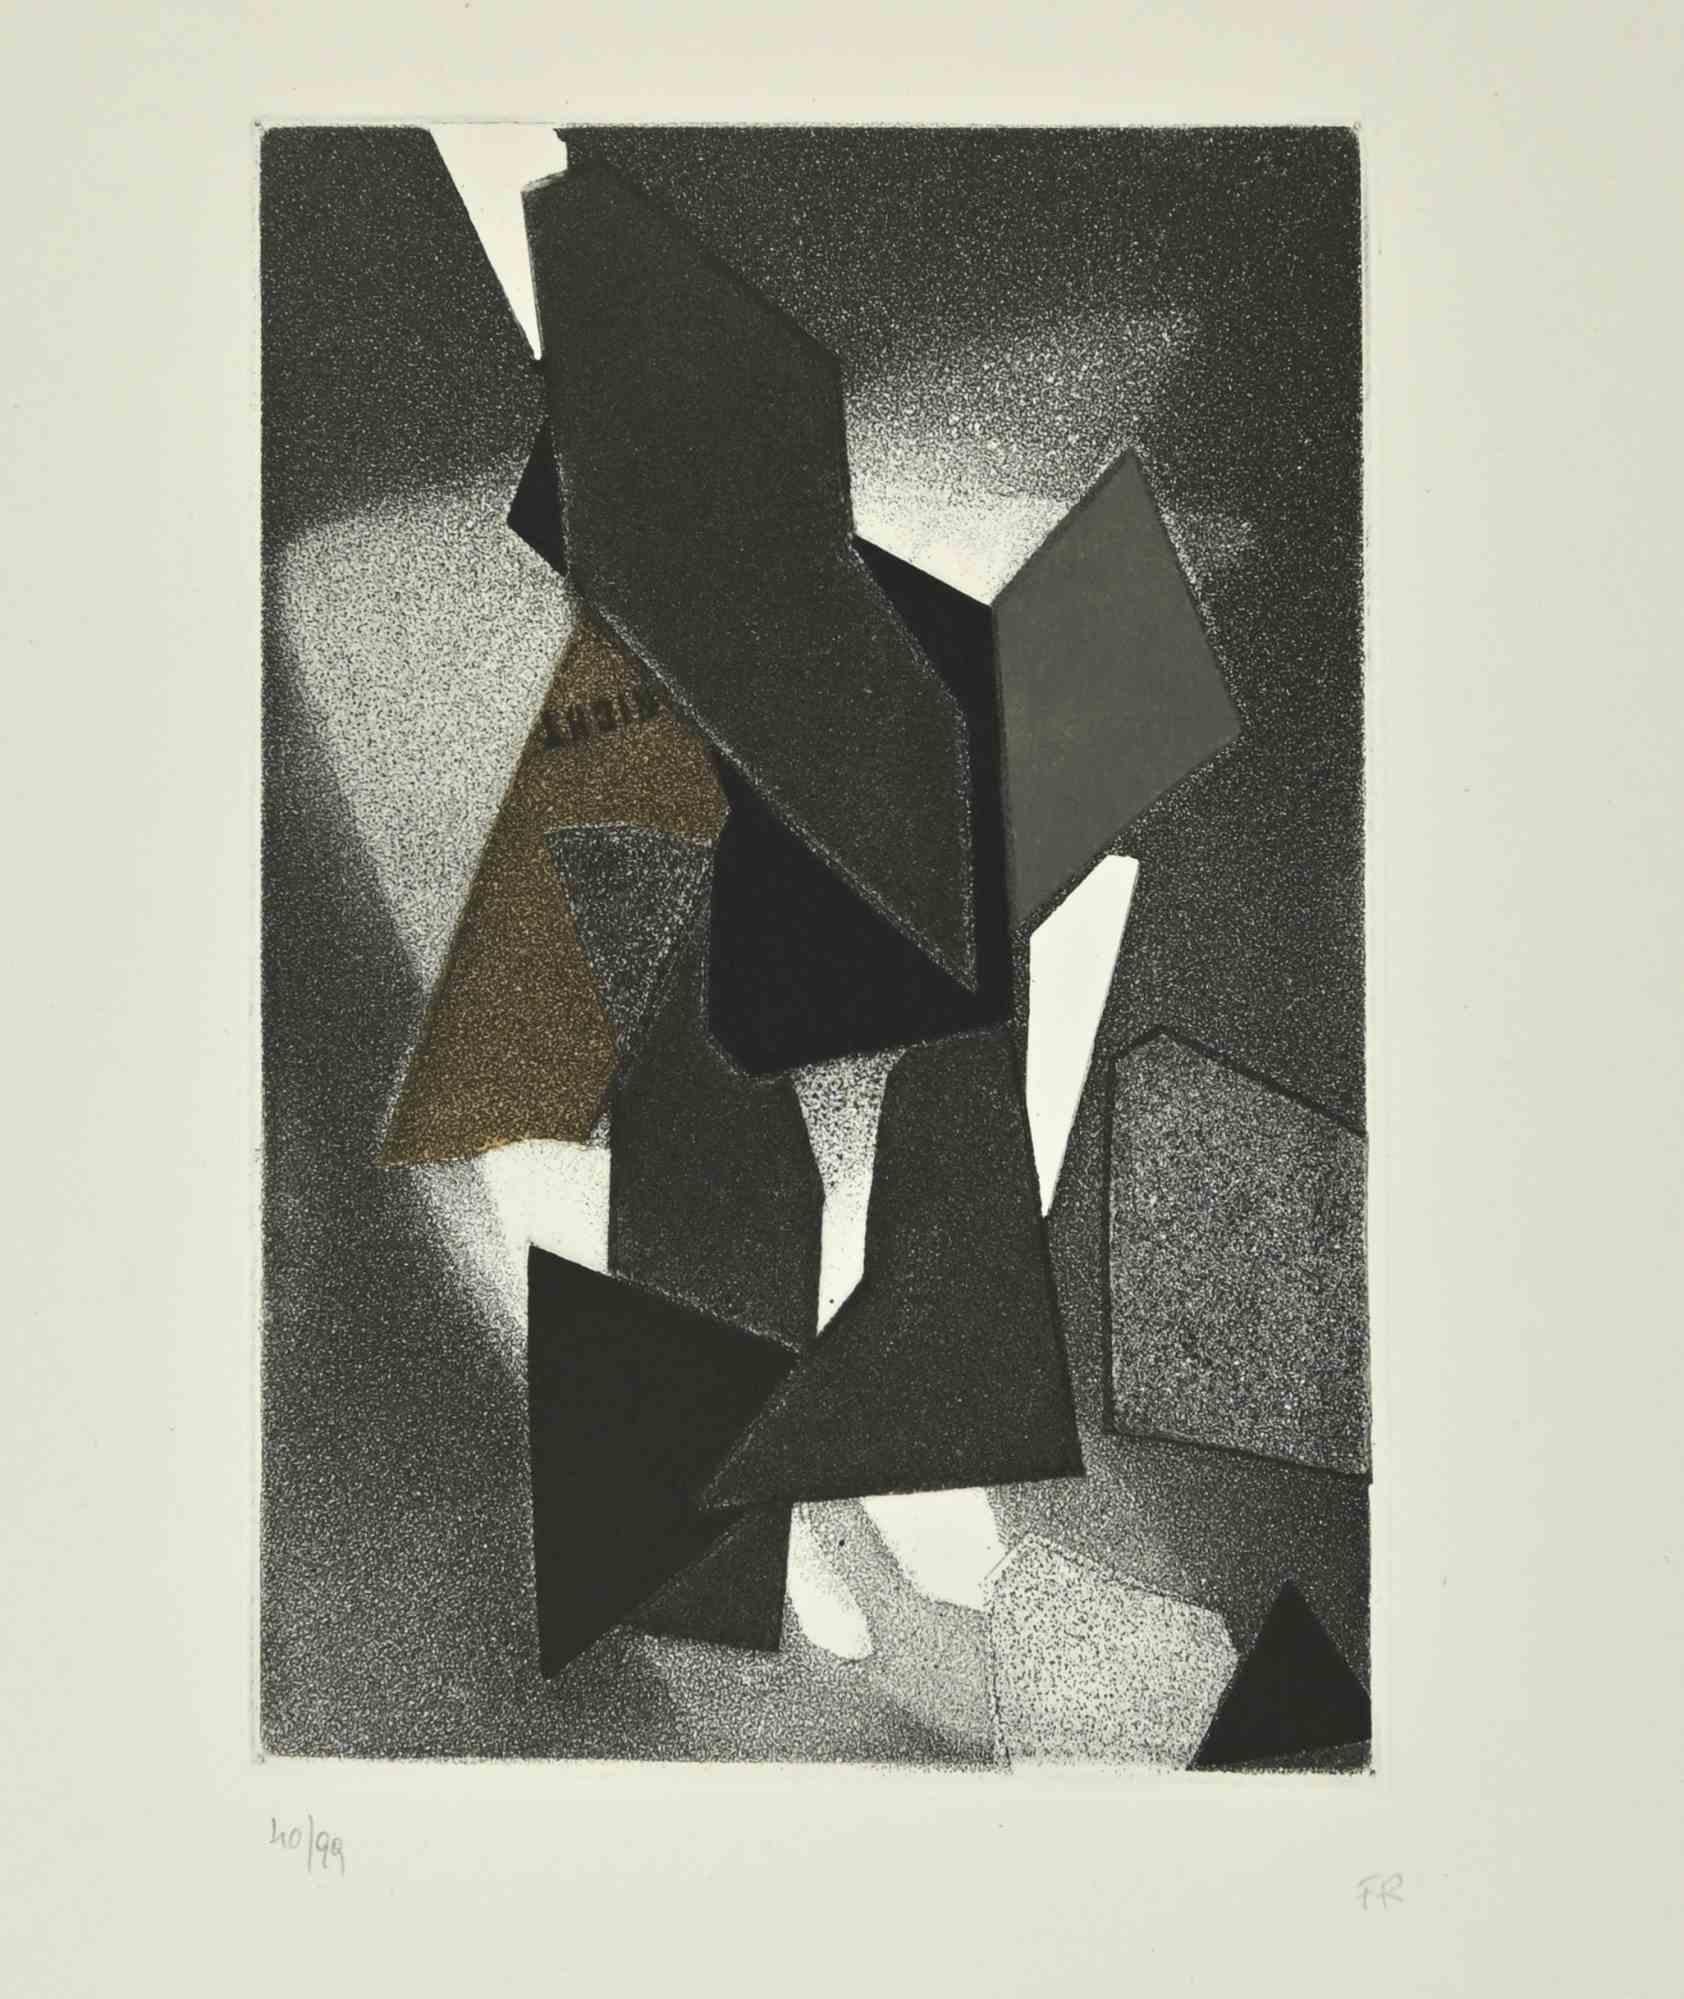 Abstract composition in black  is an etching and embossing realized by Hans Richter.

No signature.

On the back of one copy there is a label of published house with guarantee certificate.

50 x 35 cm. No frame.

 

Hans Richter (Berlin 1888.1976)